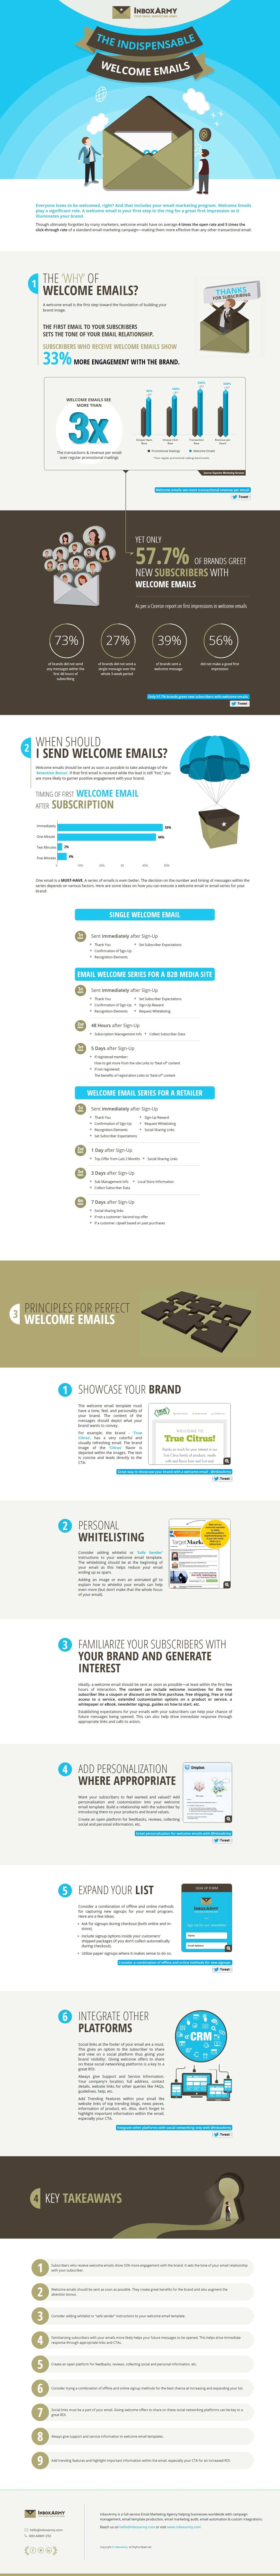 the-indispensible-welcome-email-infographic